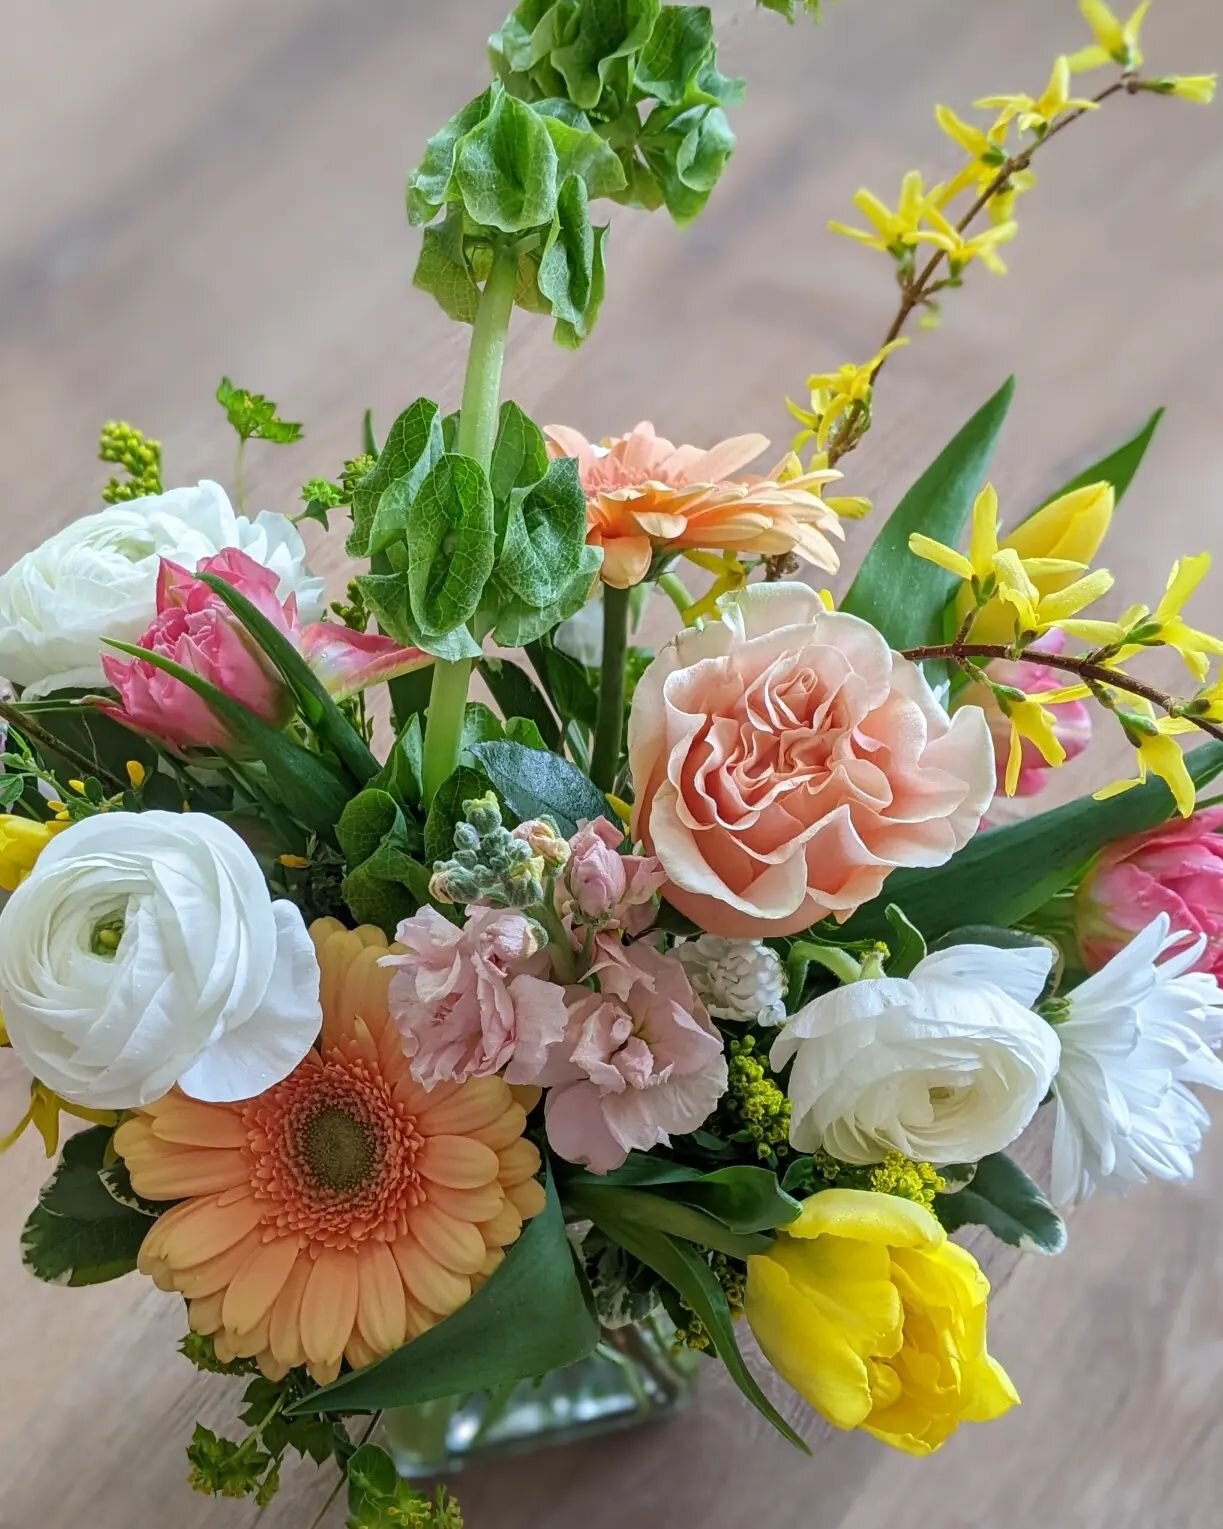 Ready for Easter 🐰💐🪴 We've got beautiful fresh flowers, gorgeous plants, books for all ages, and all the sweet treats to fill your baskets.
Store is open this weekend Thu &amp; Fri 12-6 &amp; Sat 10-4. 2139 Buffalo Rd, Gates. And you can preorder 